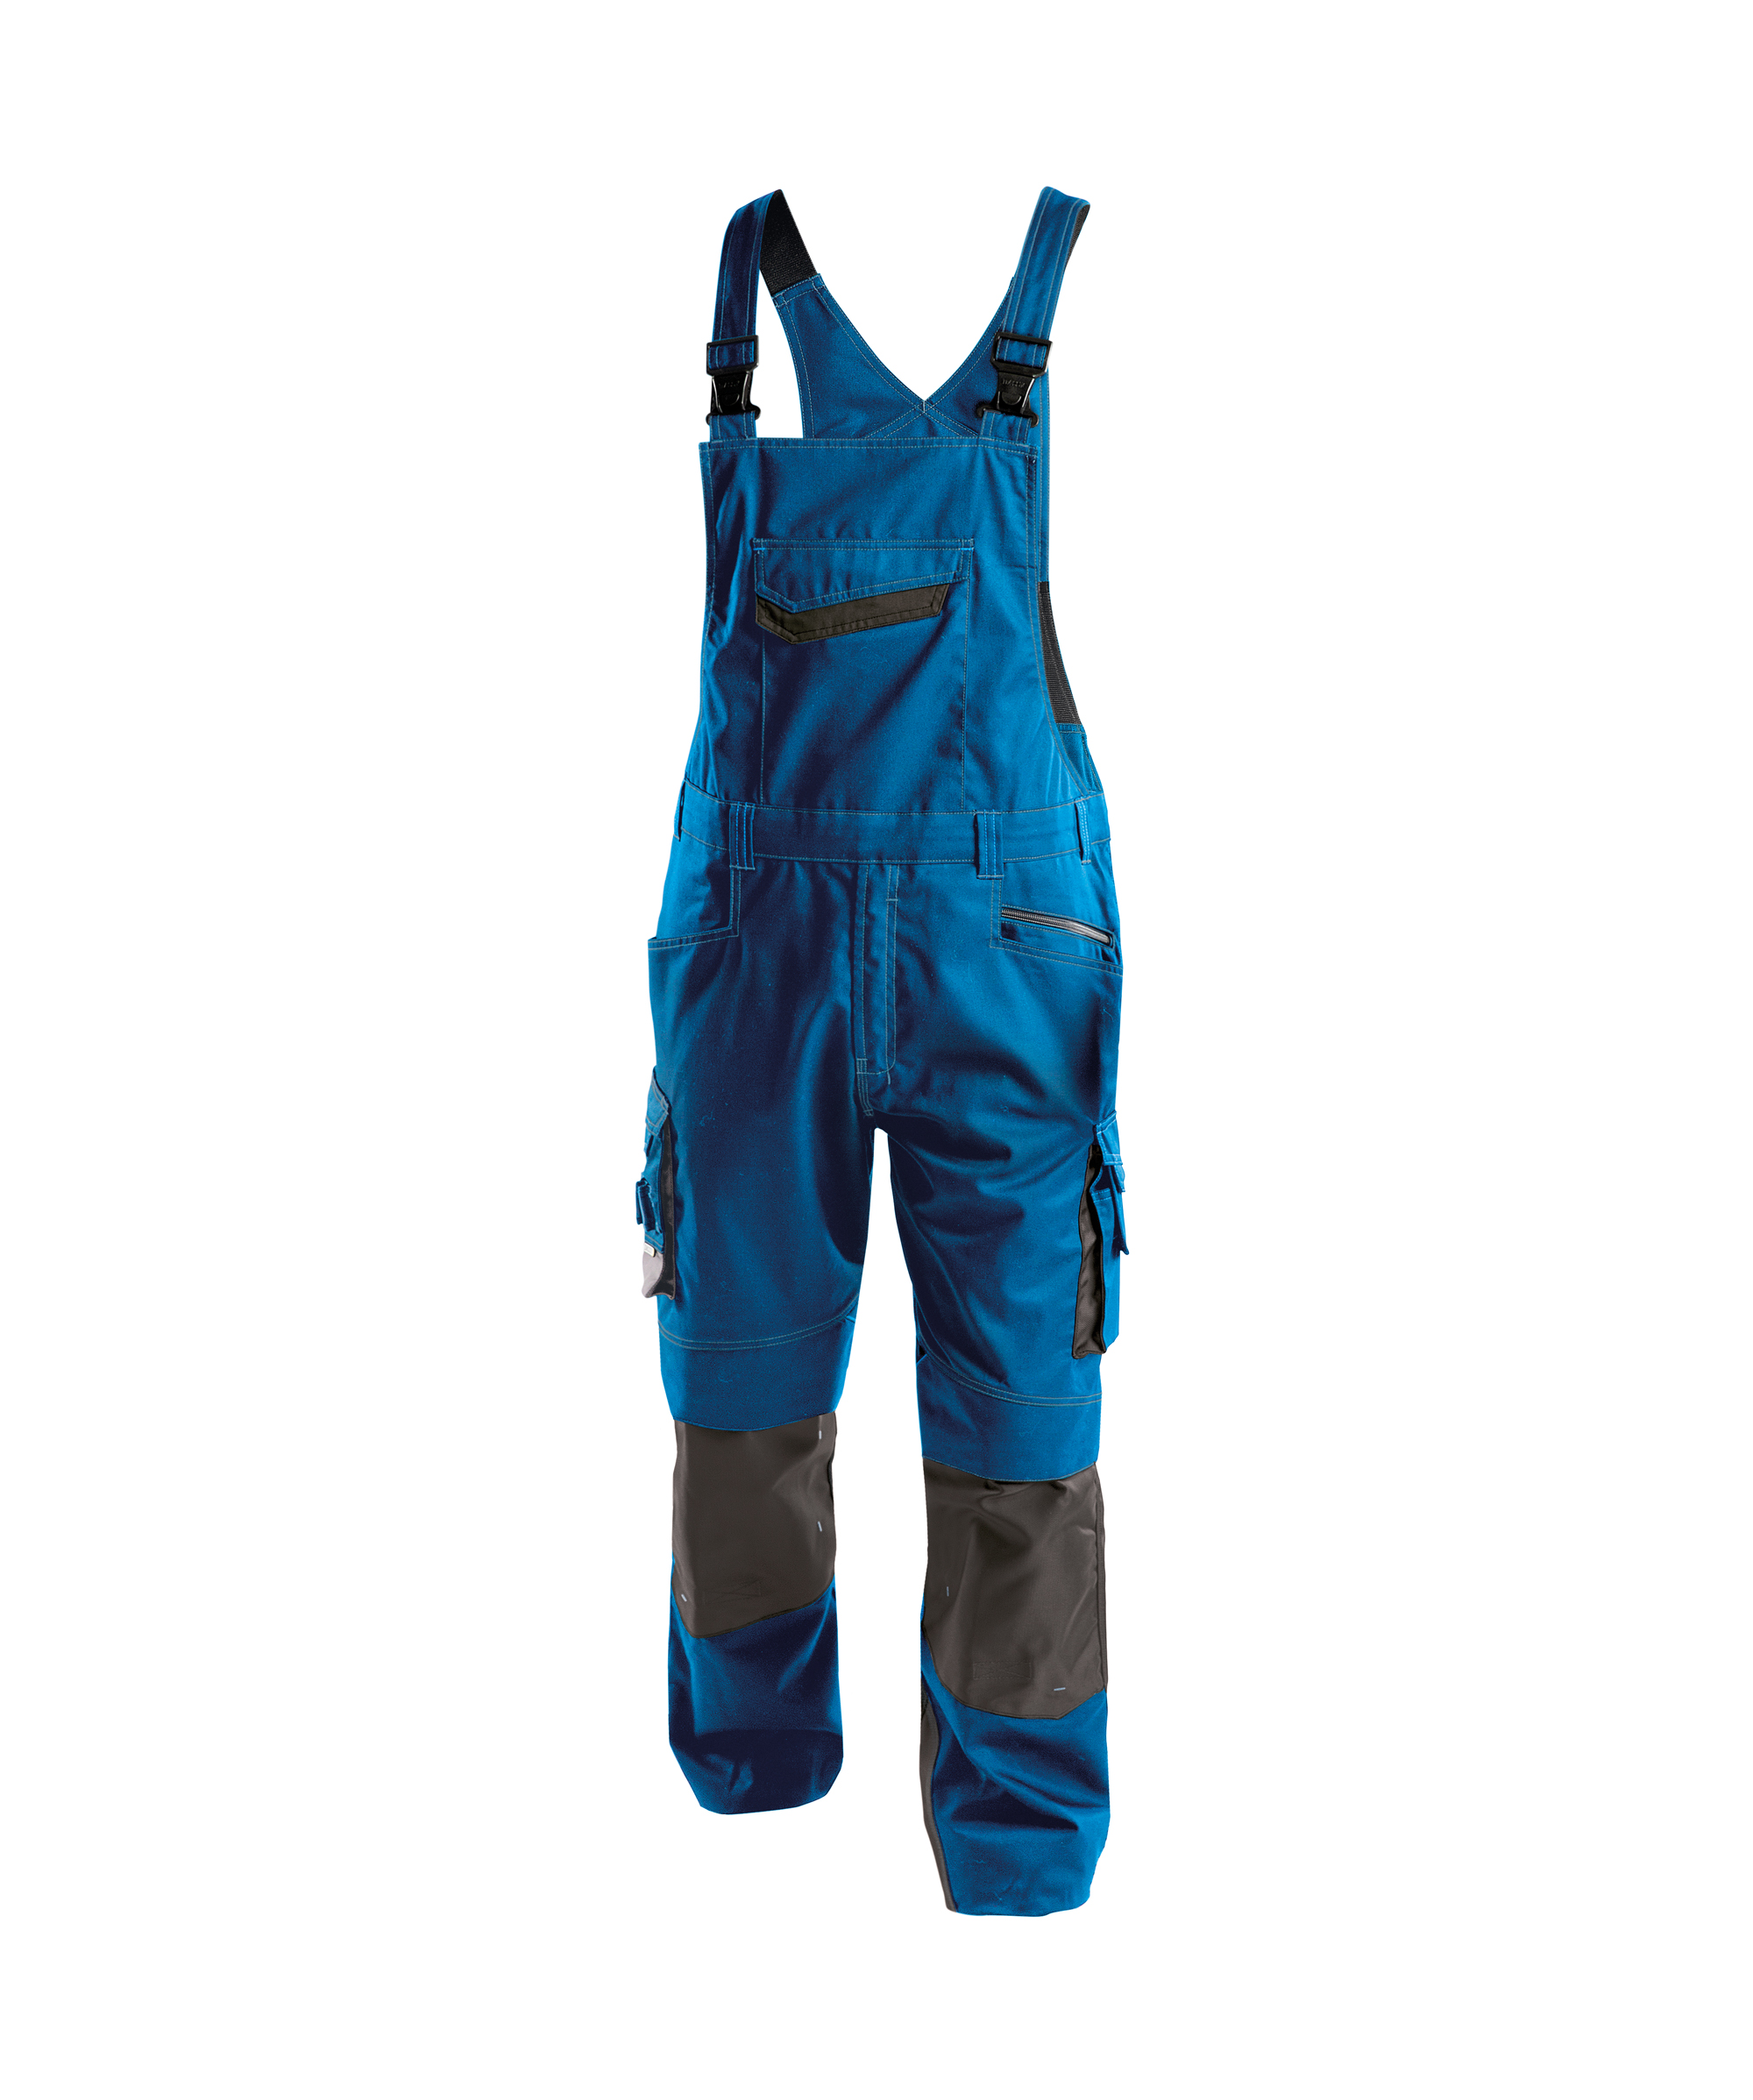 voltic_two-tone-brace-overall-with-knee-pockets_azure-blue-anthracite-grey_front.jpg